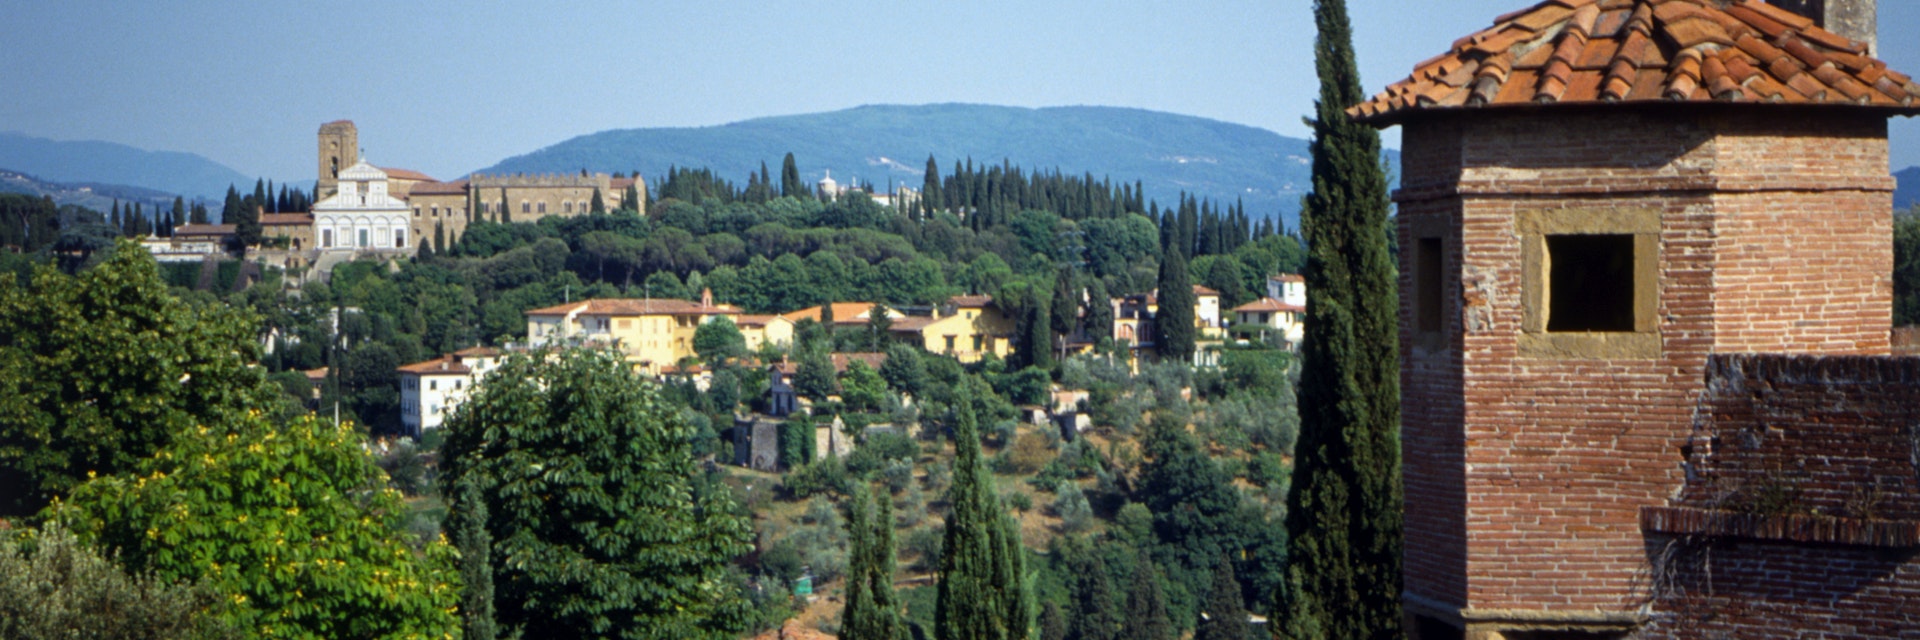 Italy, Florence, view across to San Miniato al Monte from Forte di Belvedere, with many cypress trees.